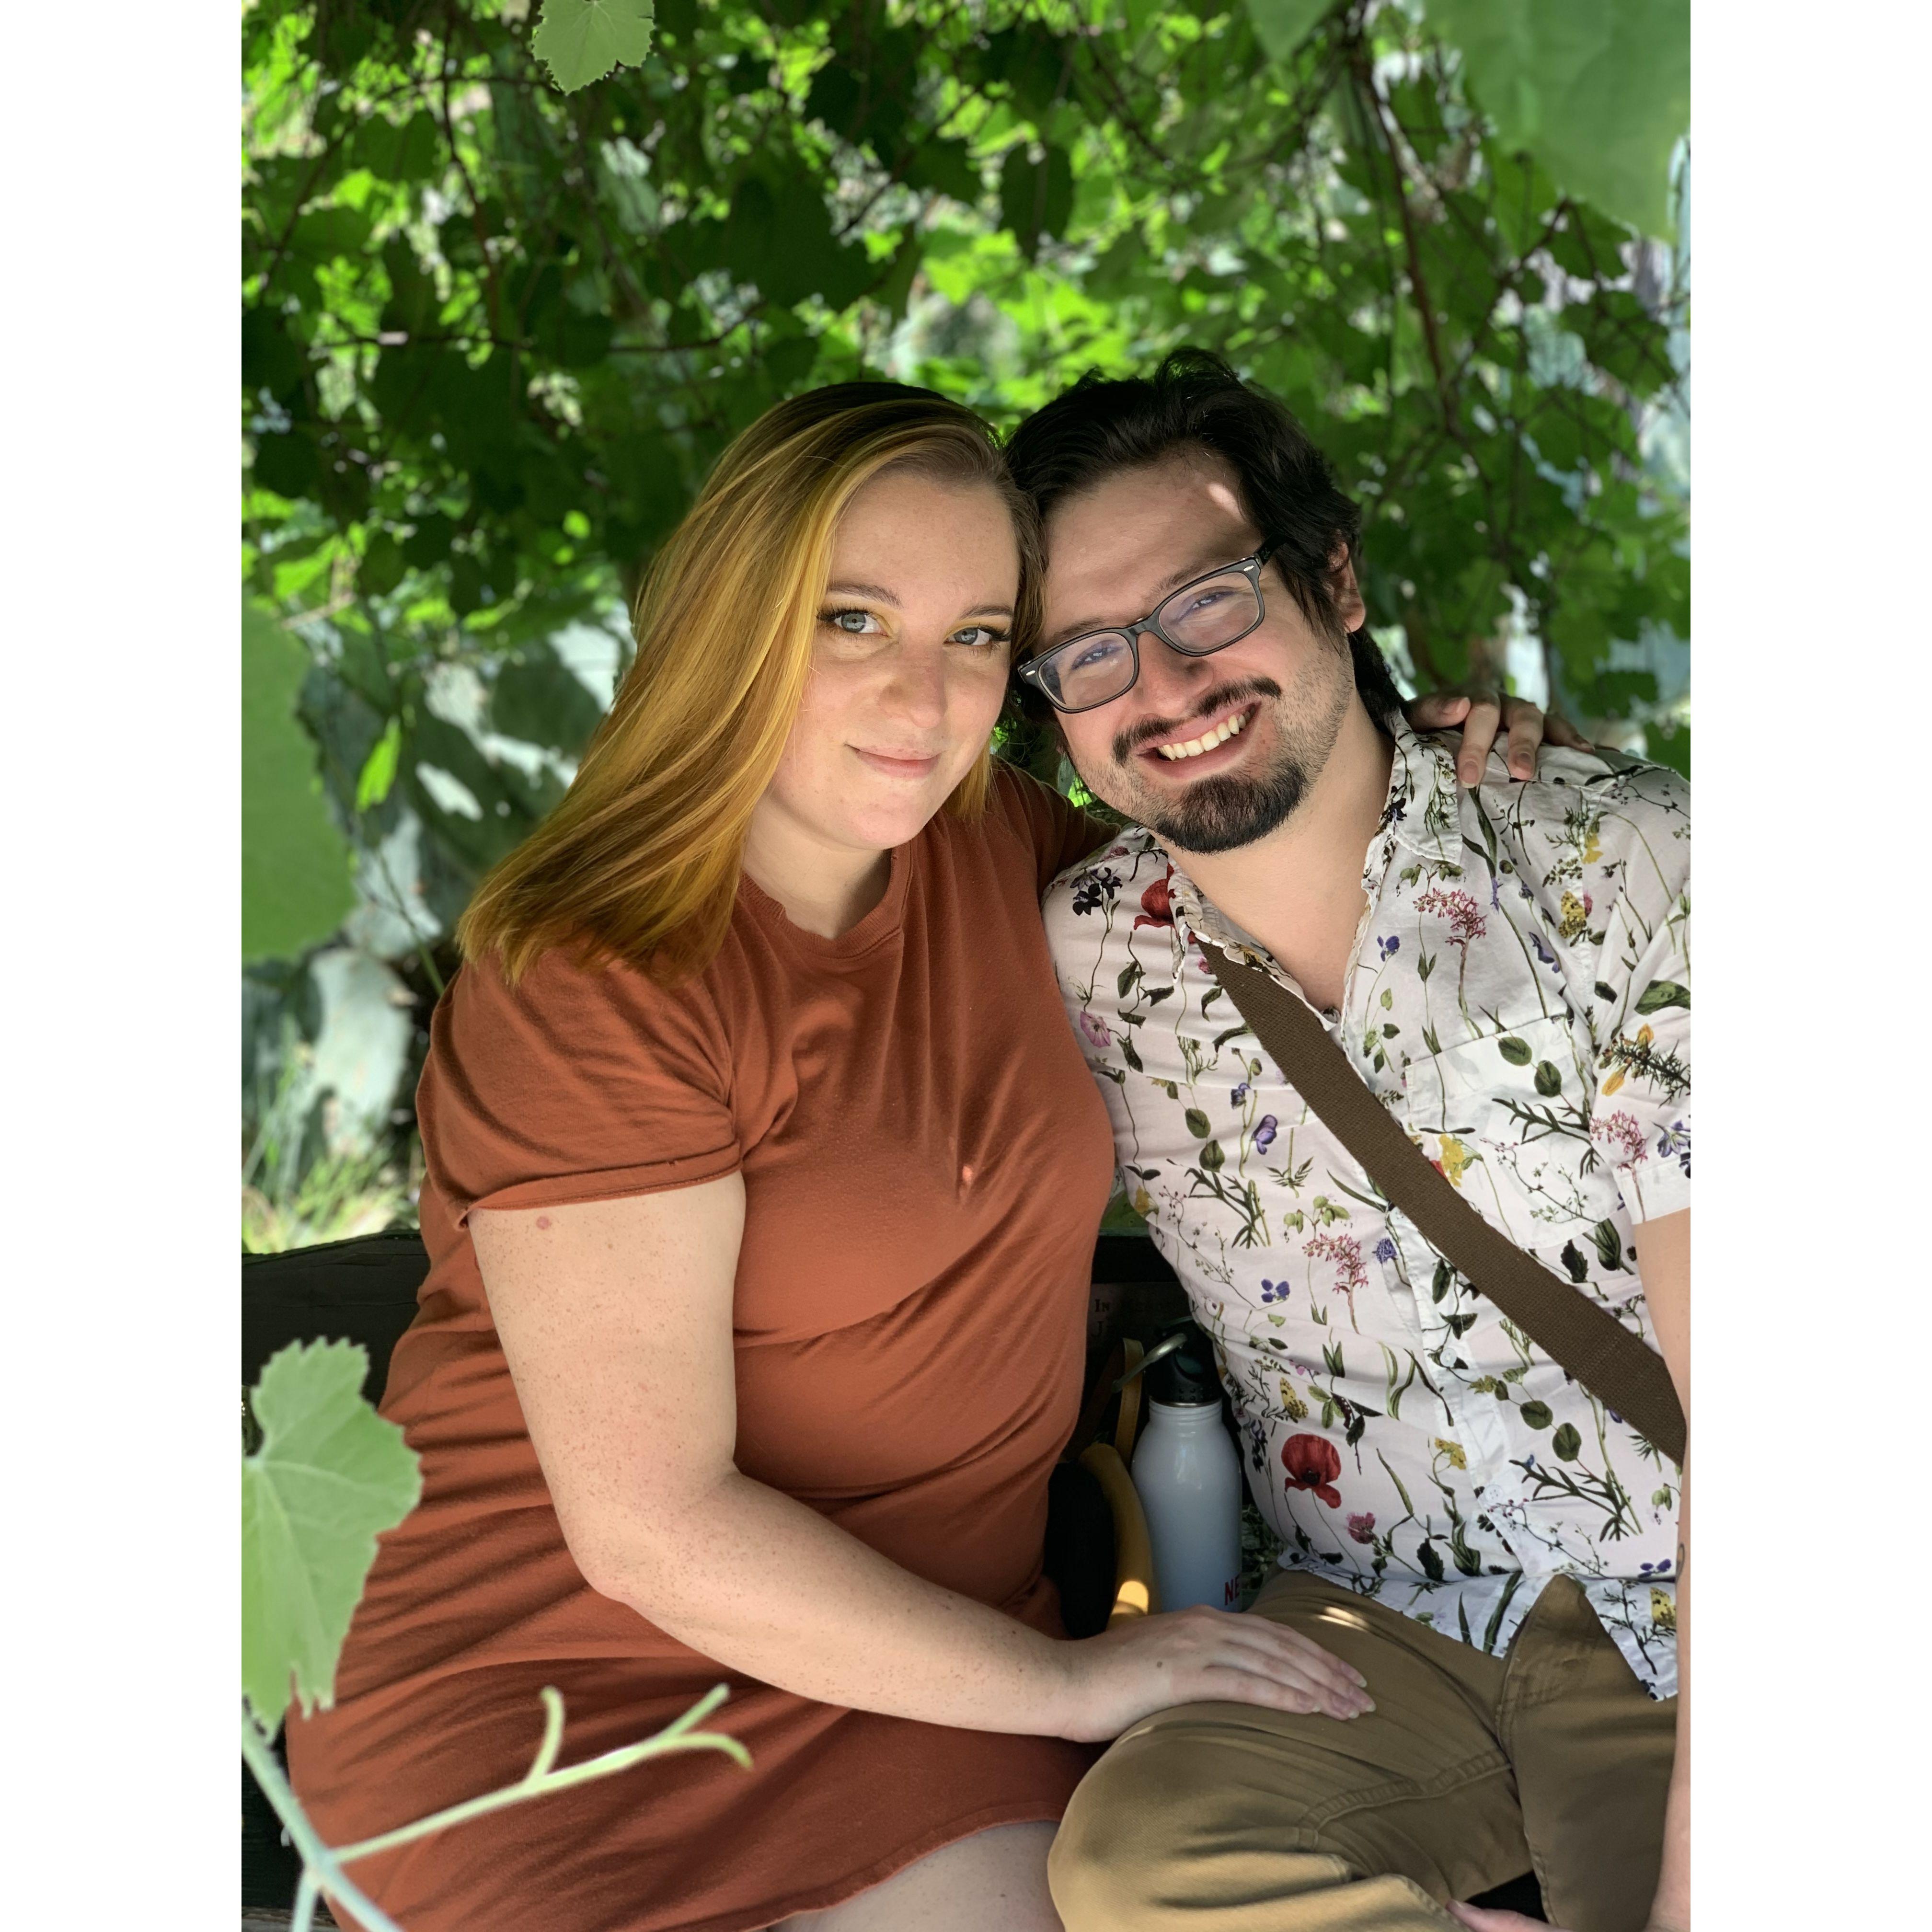 Celebrating our 3rd anniversary (& surviving the early pandemic days) at Descanso Gardens